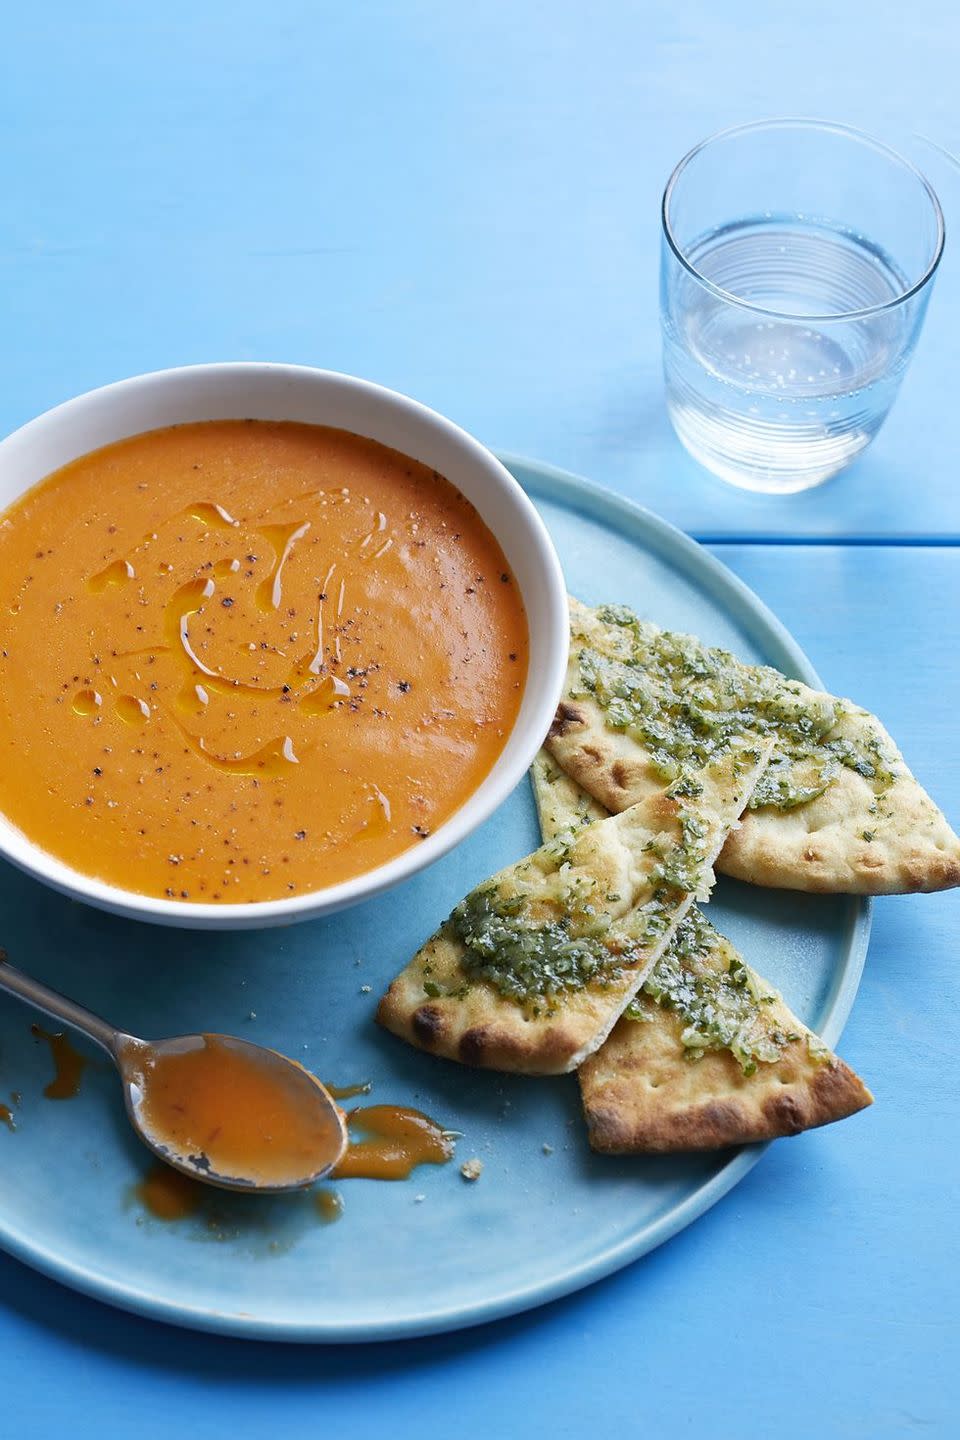 Spiced Tomato Soup with Flatbread